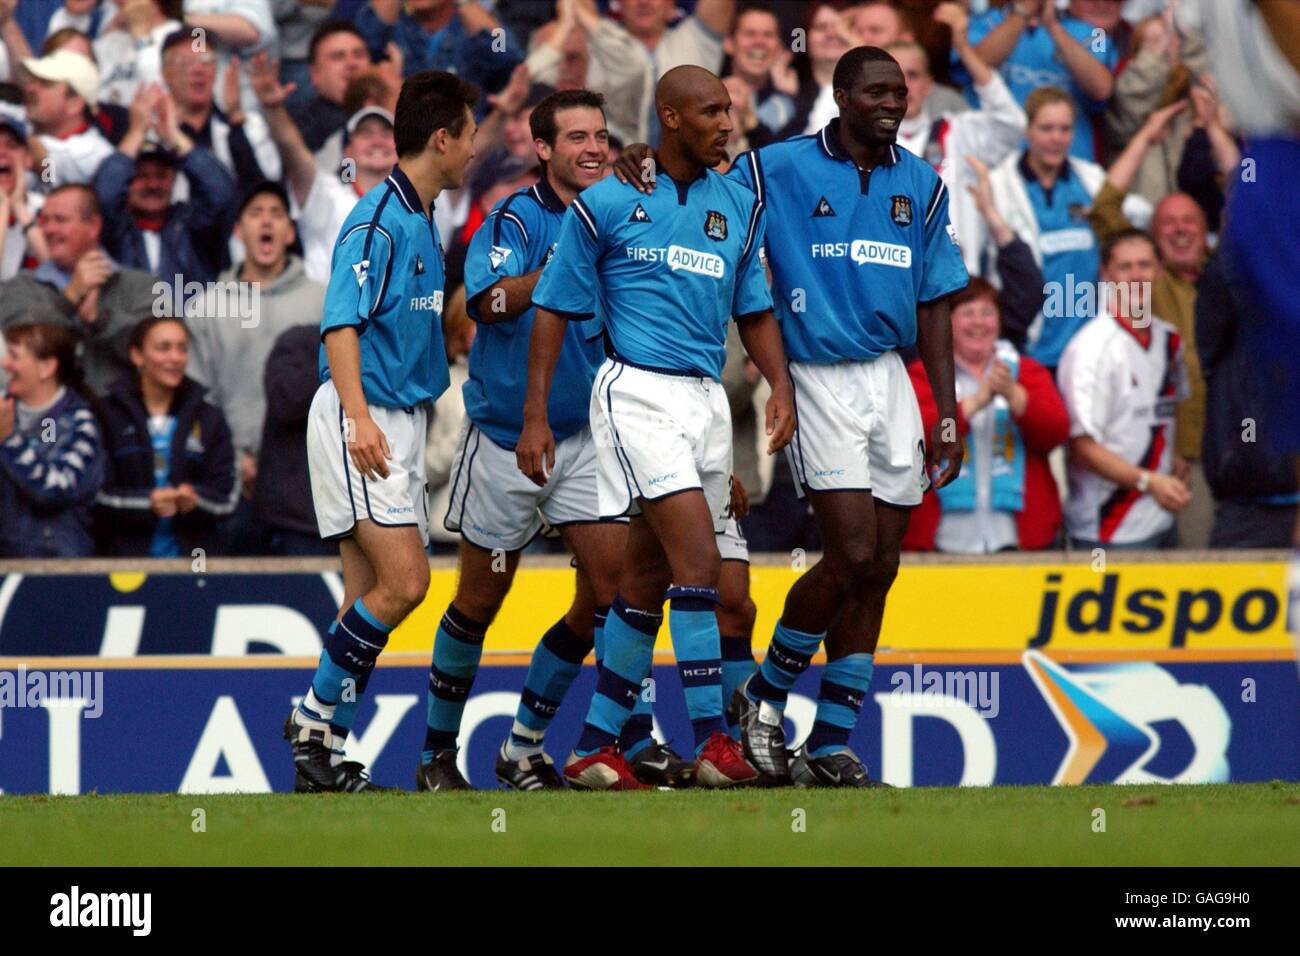 Soccer - FA Barclaycard Premiership - Manchester City v Everton. Manchester City players surround their teammate Nicolas Anelka in celebration as he completes his hat trick Stock Photo